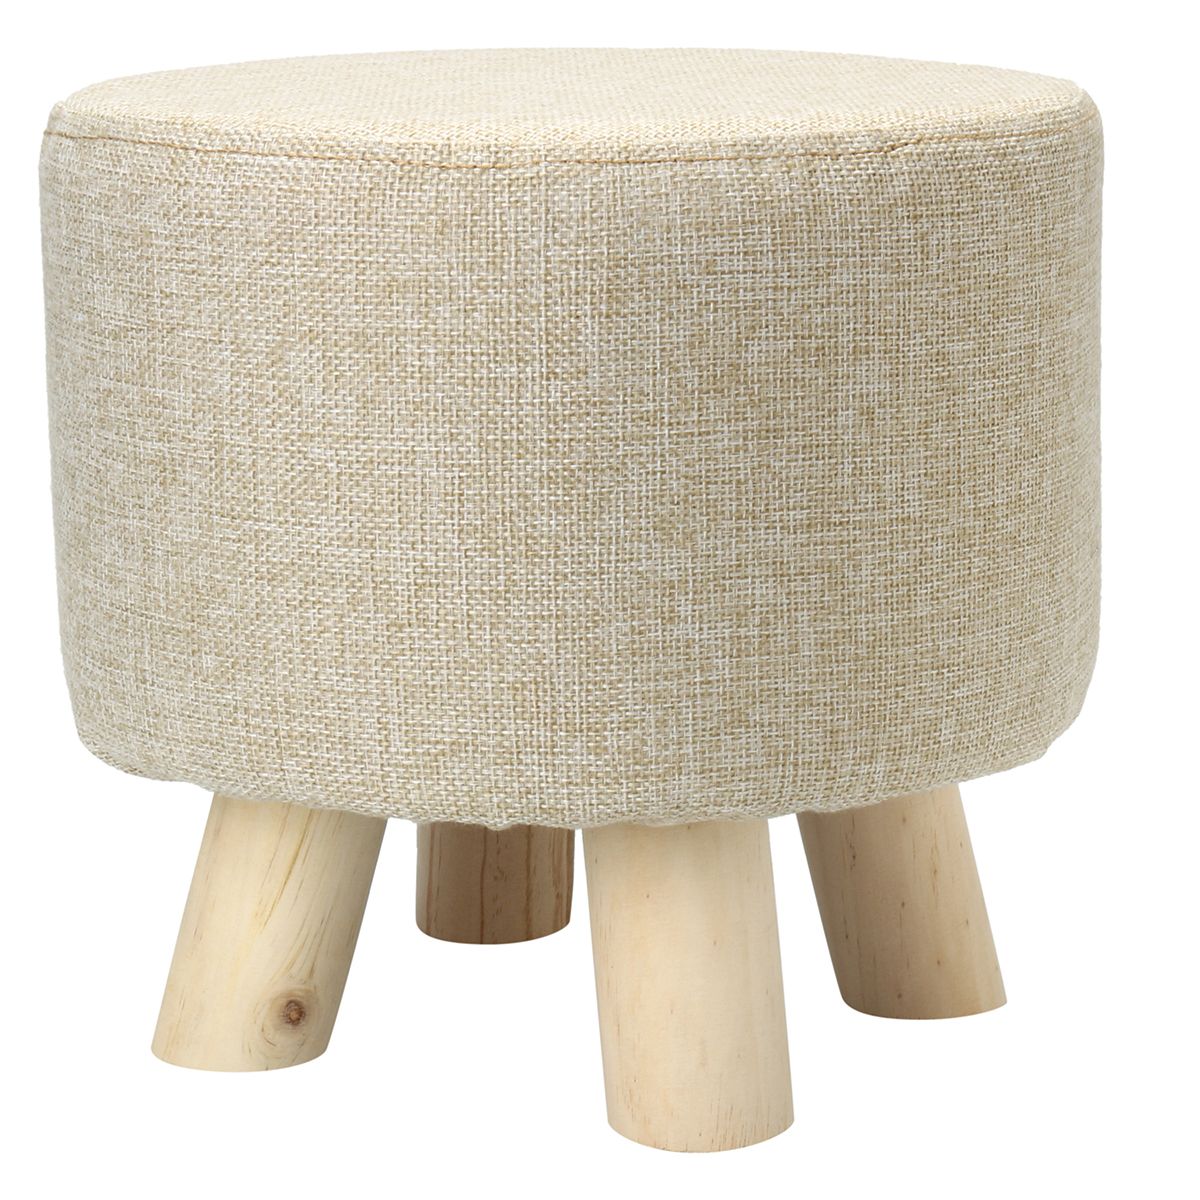 11'' High Living Room Pouffe Round Chairs ,sofa Ottoman Foot Stool, 4 Pertaining To Most Recent Cream Linen And Fir Wood Round Ottomans (View 1 of 10)